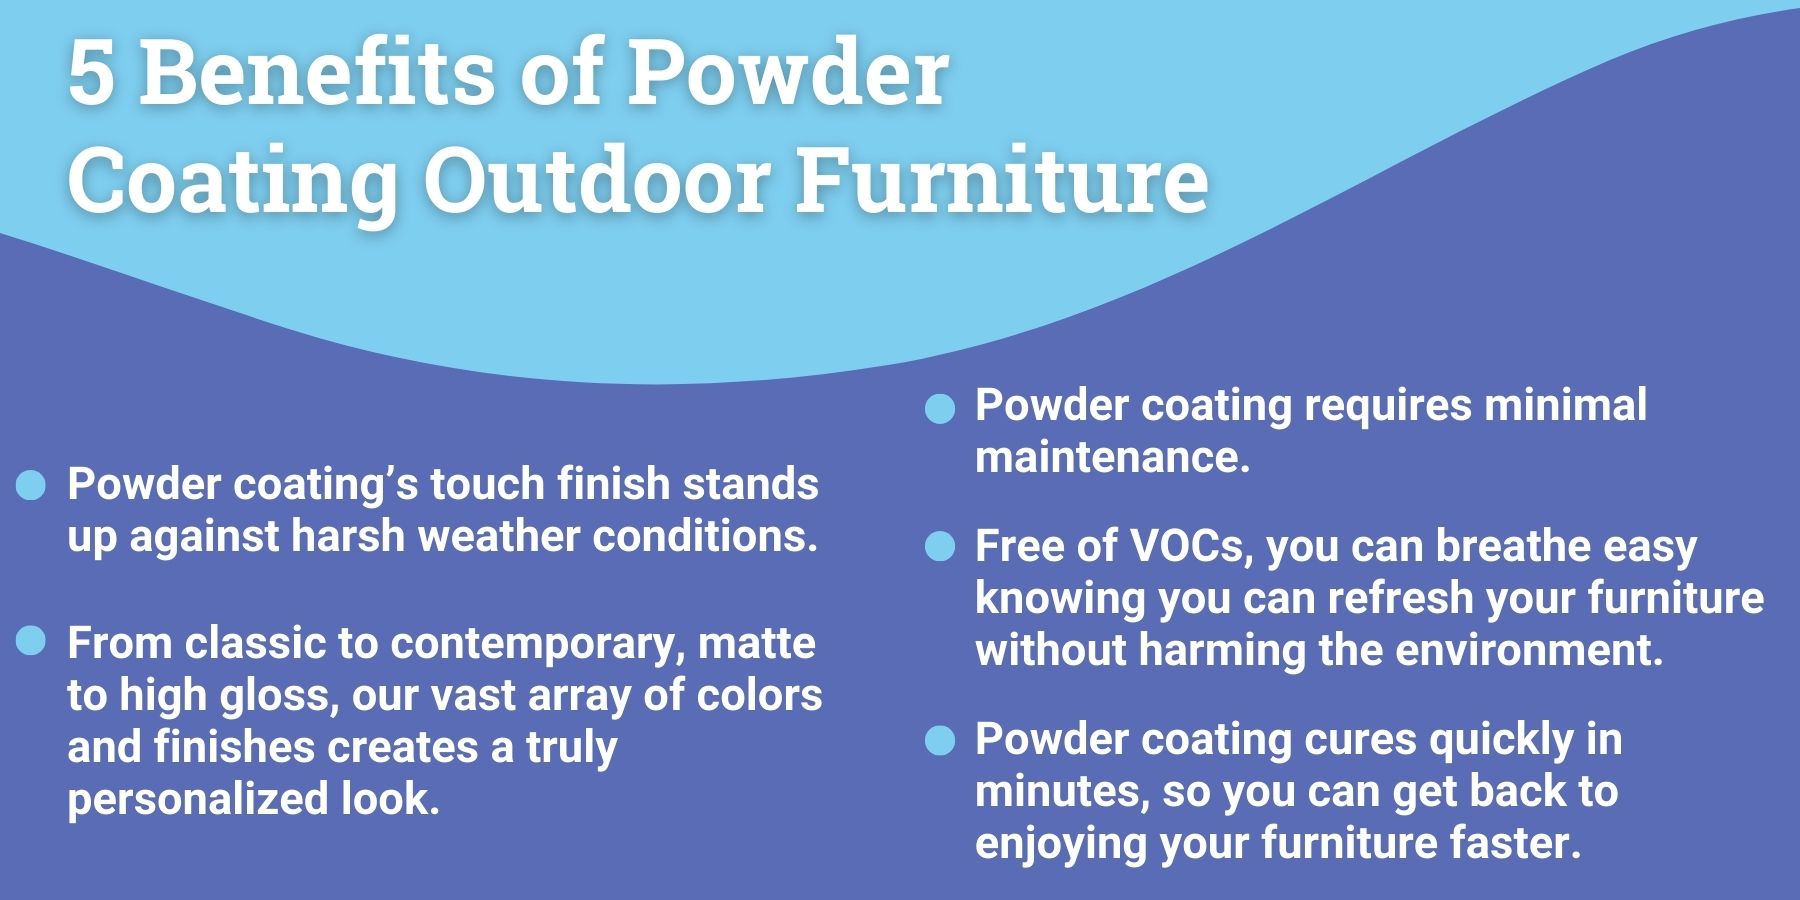 original infographic stating the benefits of powder coating your outdoor furniture